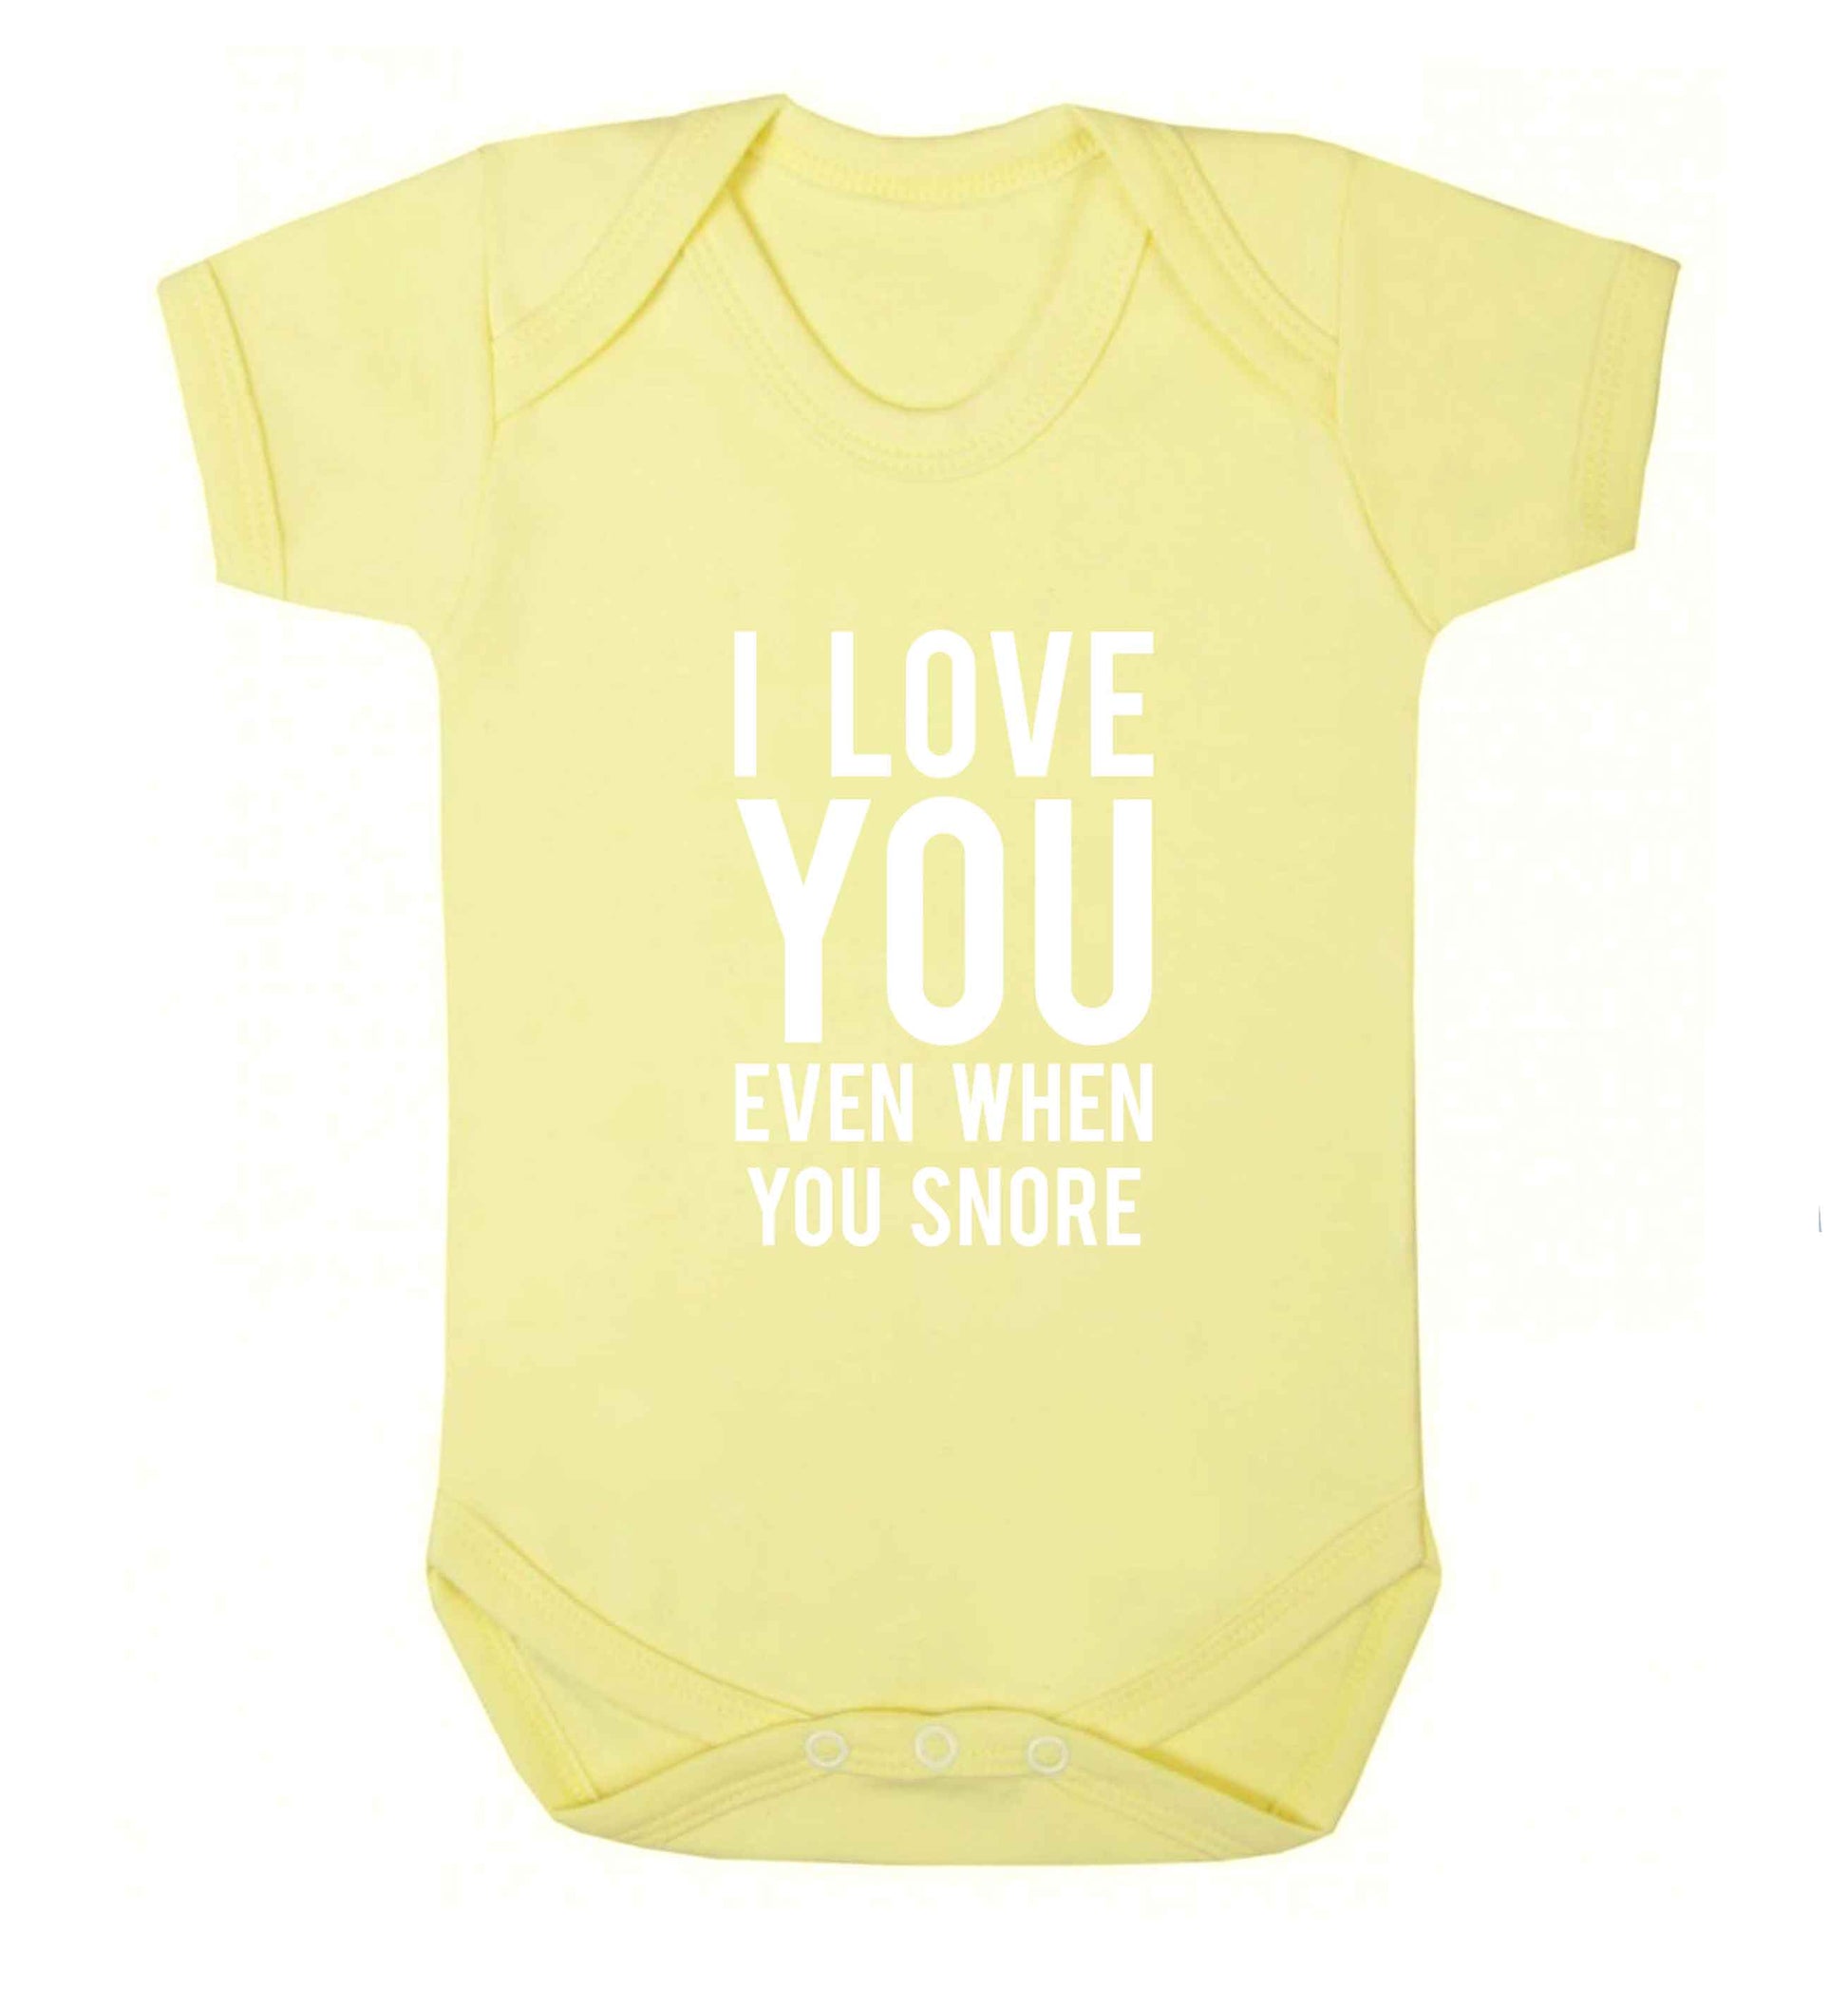 I love you even when you snore baby vest pale yellow 18-24 months